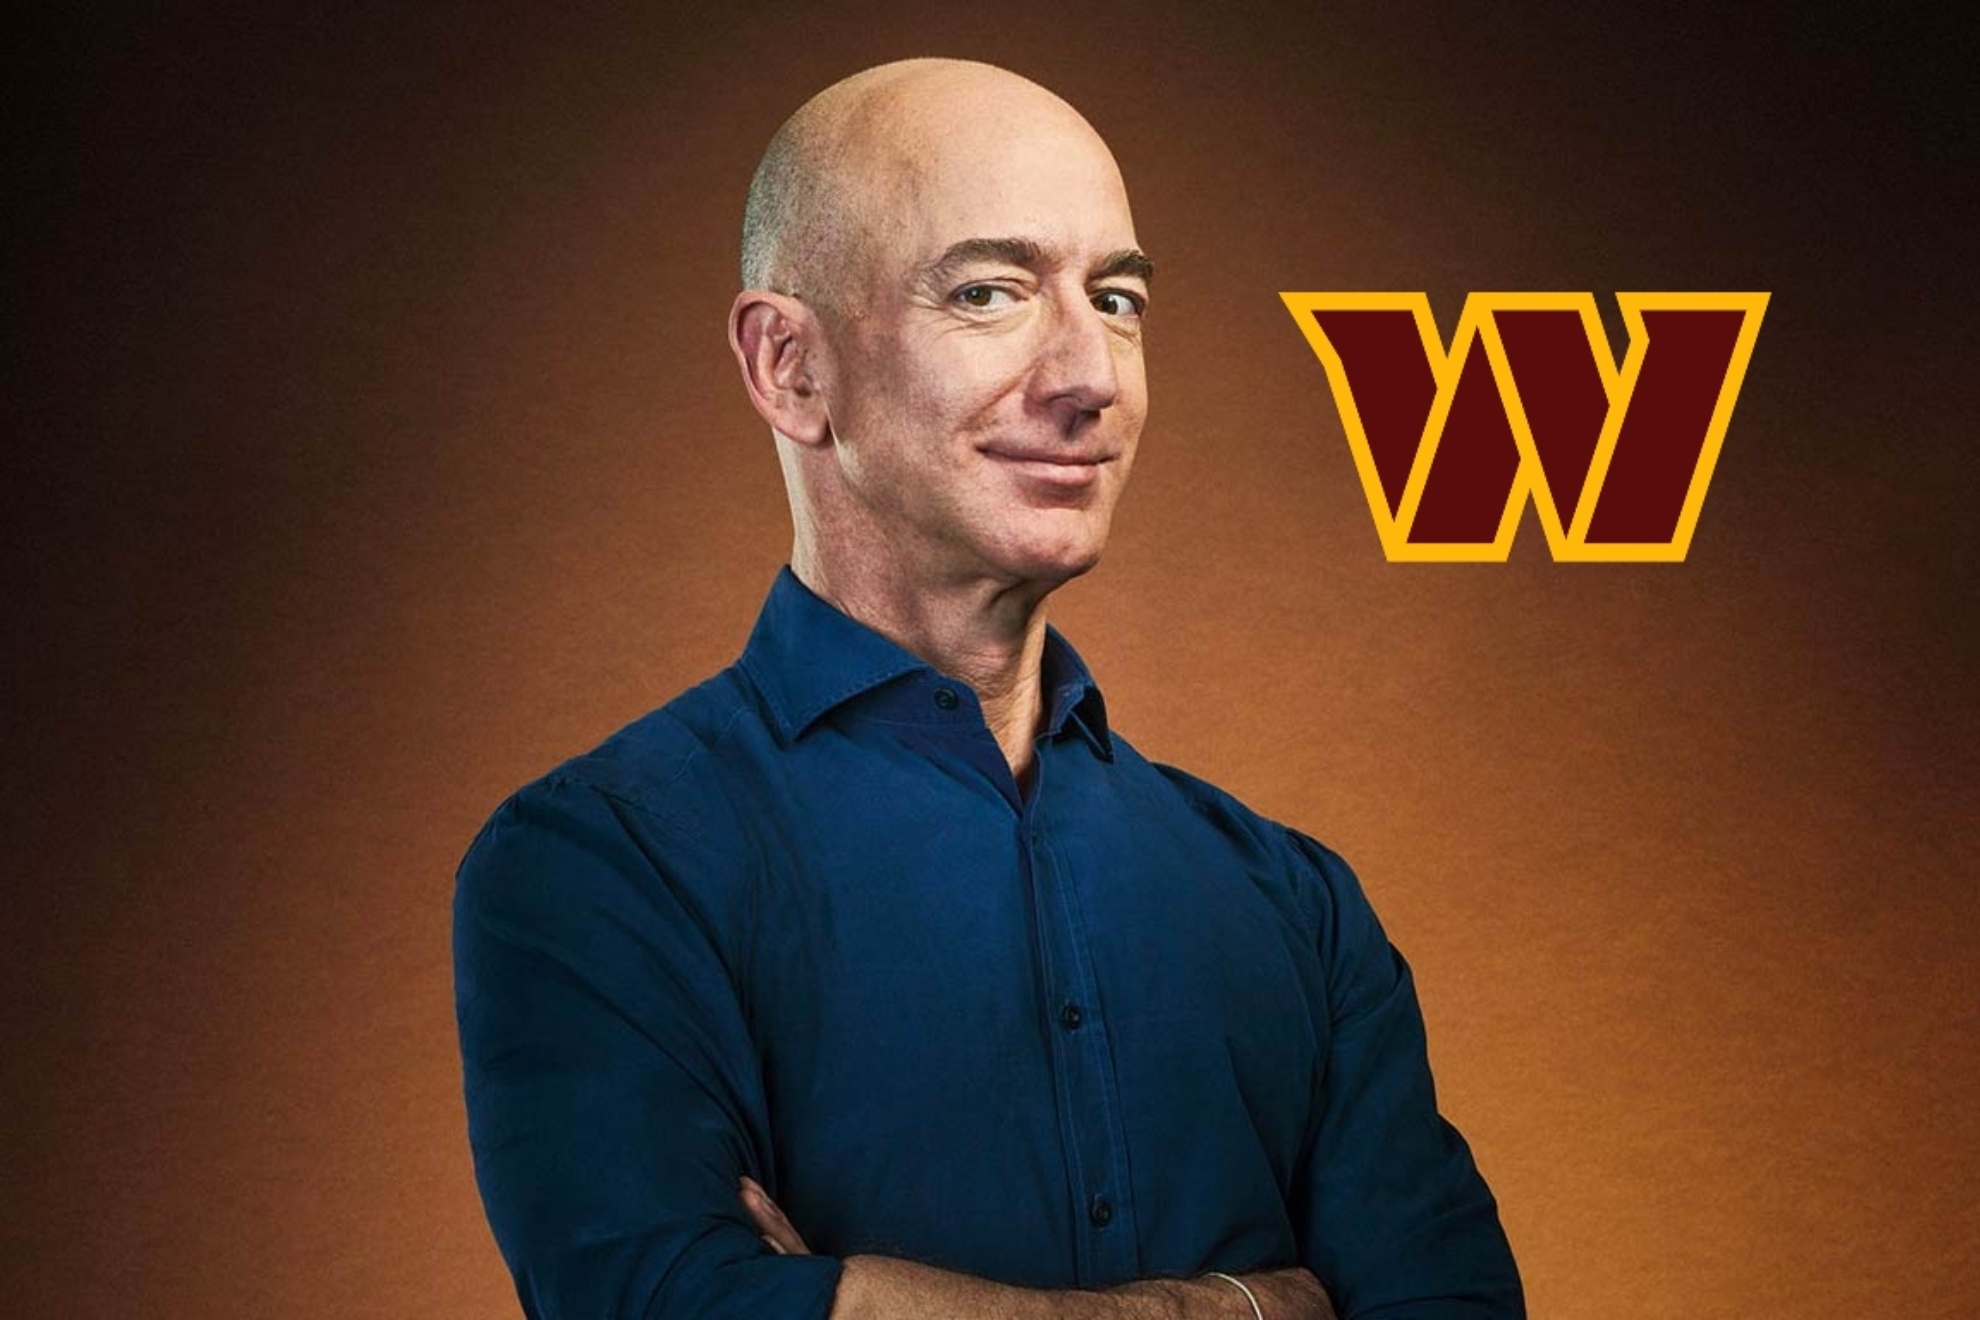 Could Bezos become the new owner of the Washington Commanders?